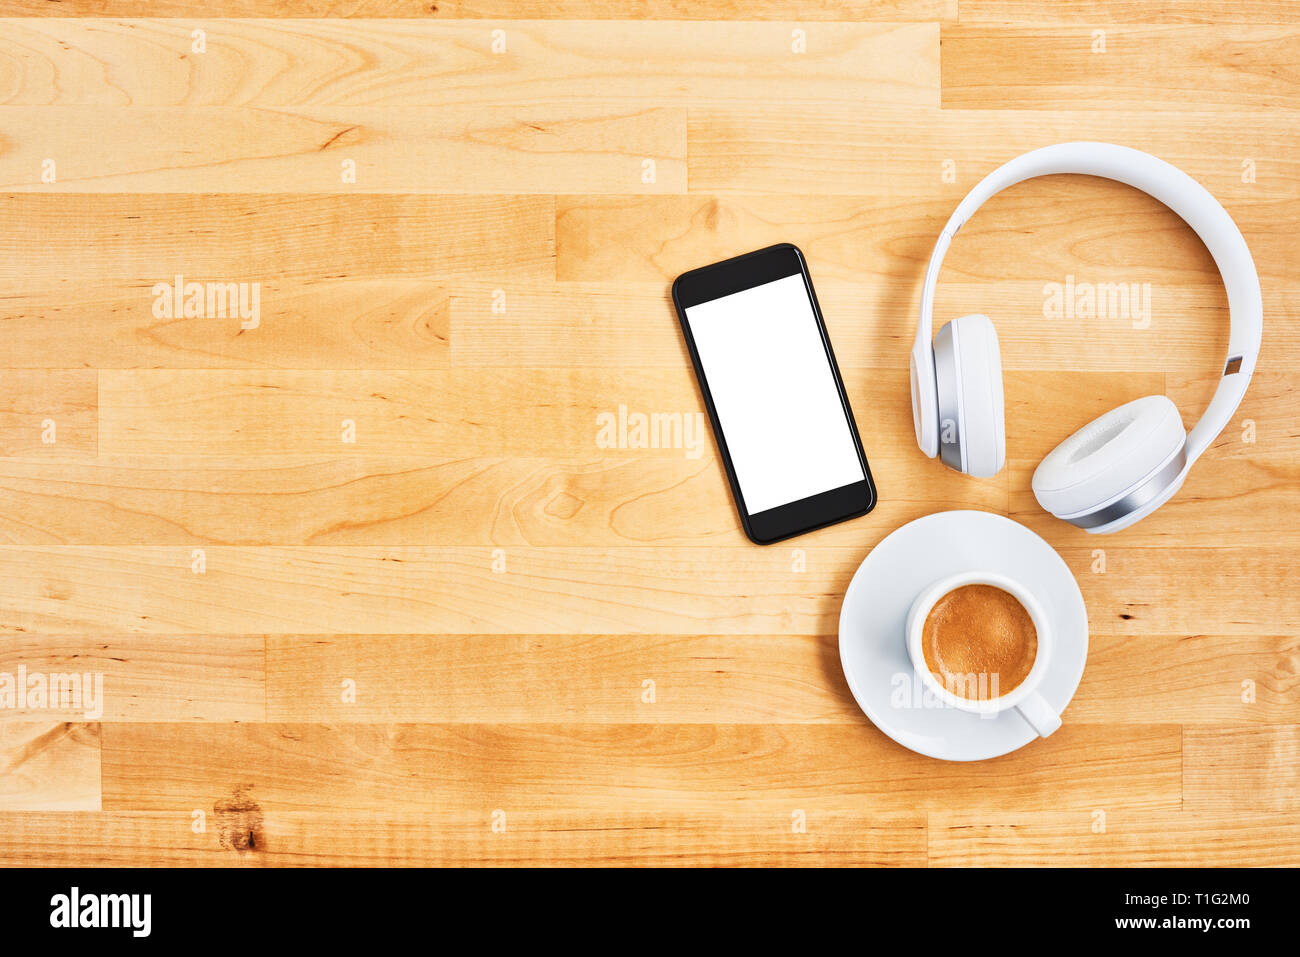 Smartphone with blank white screen, wireless headphone and cup of coffee on wooden office desk. Top view. Copy space for text or design. Flat lay. Stock Photo